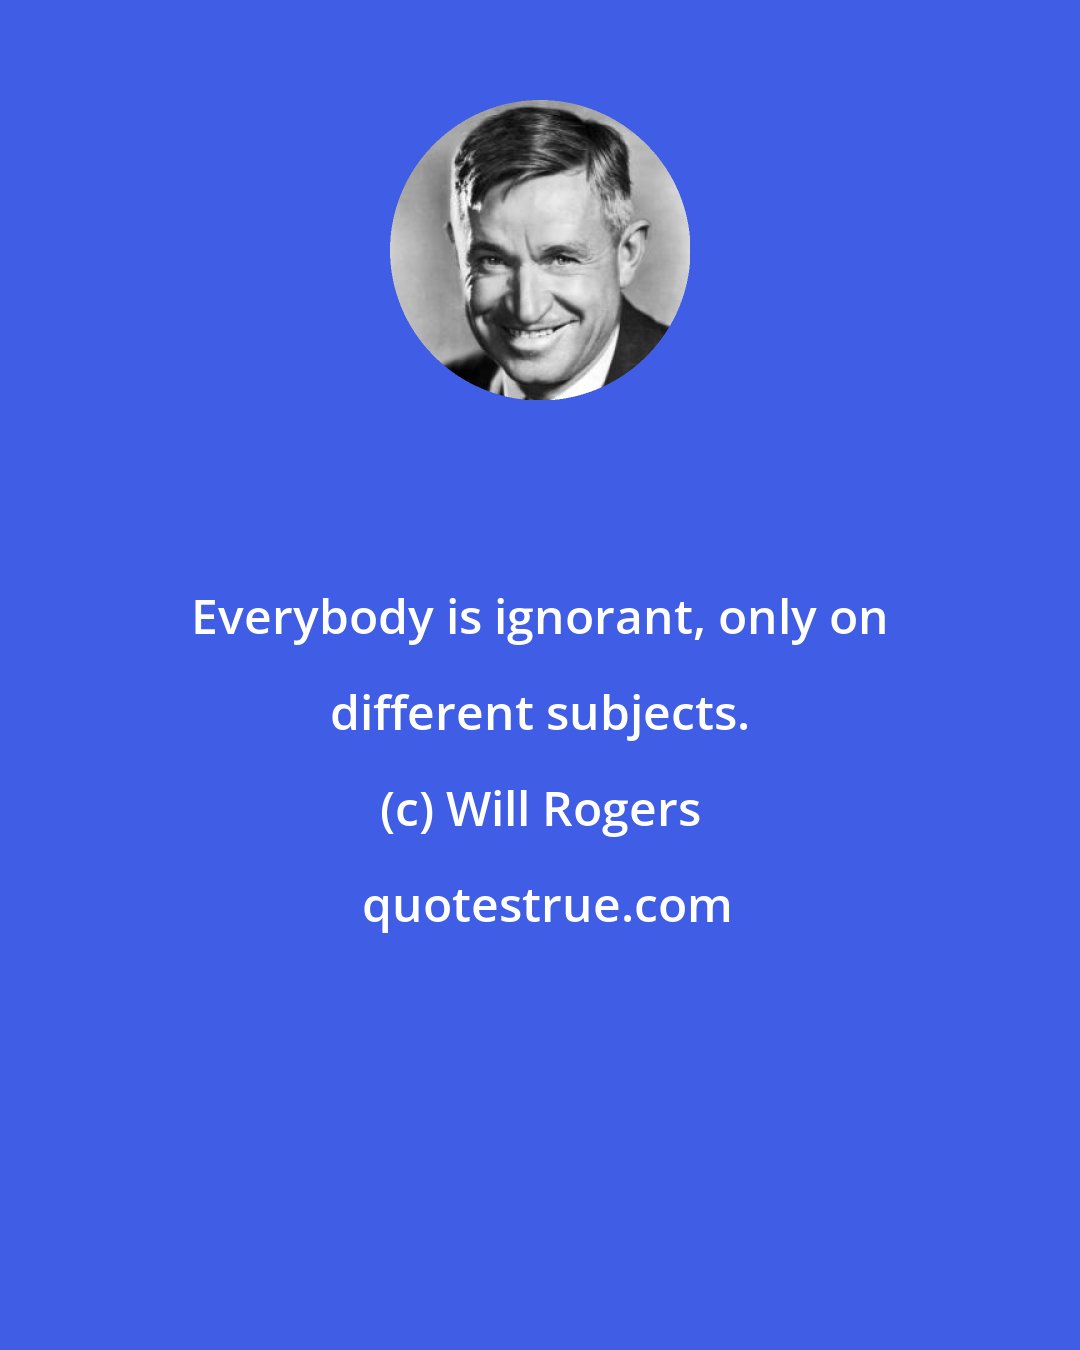 Will Rogers: Everybody is ignorant, only on different subjects.